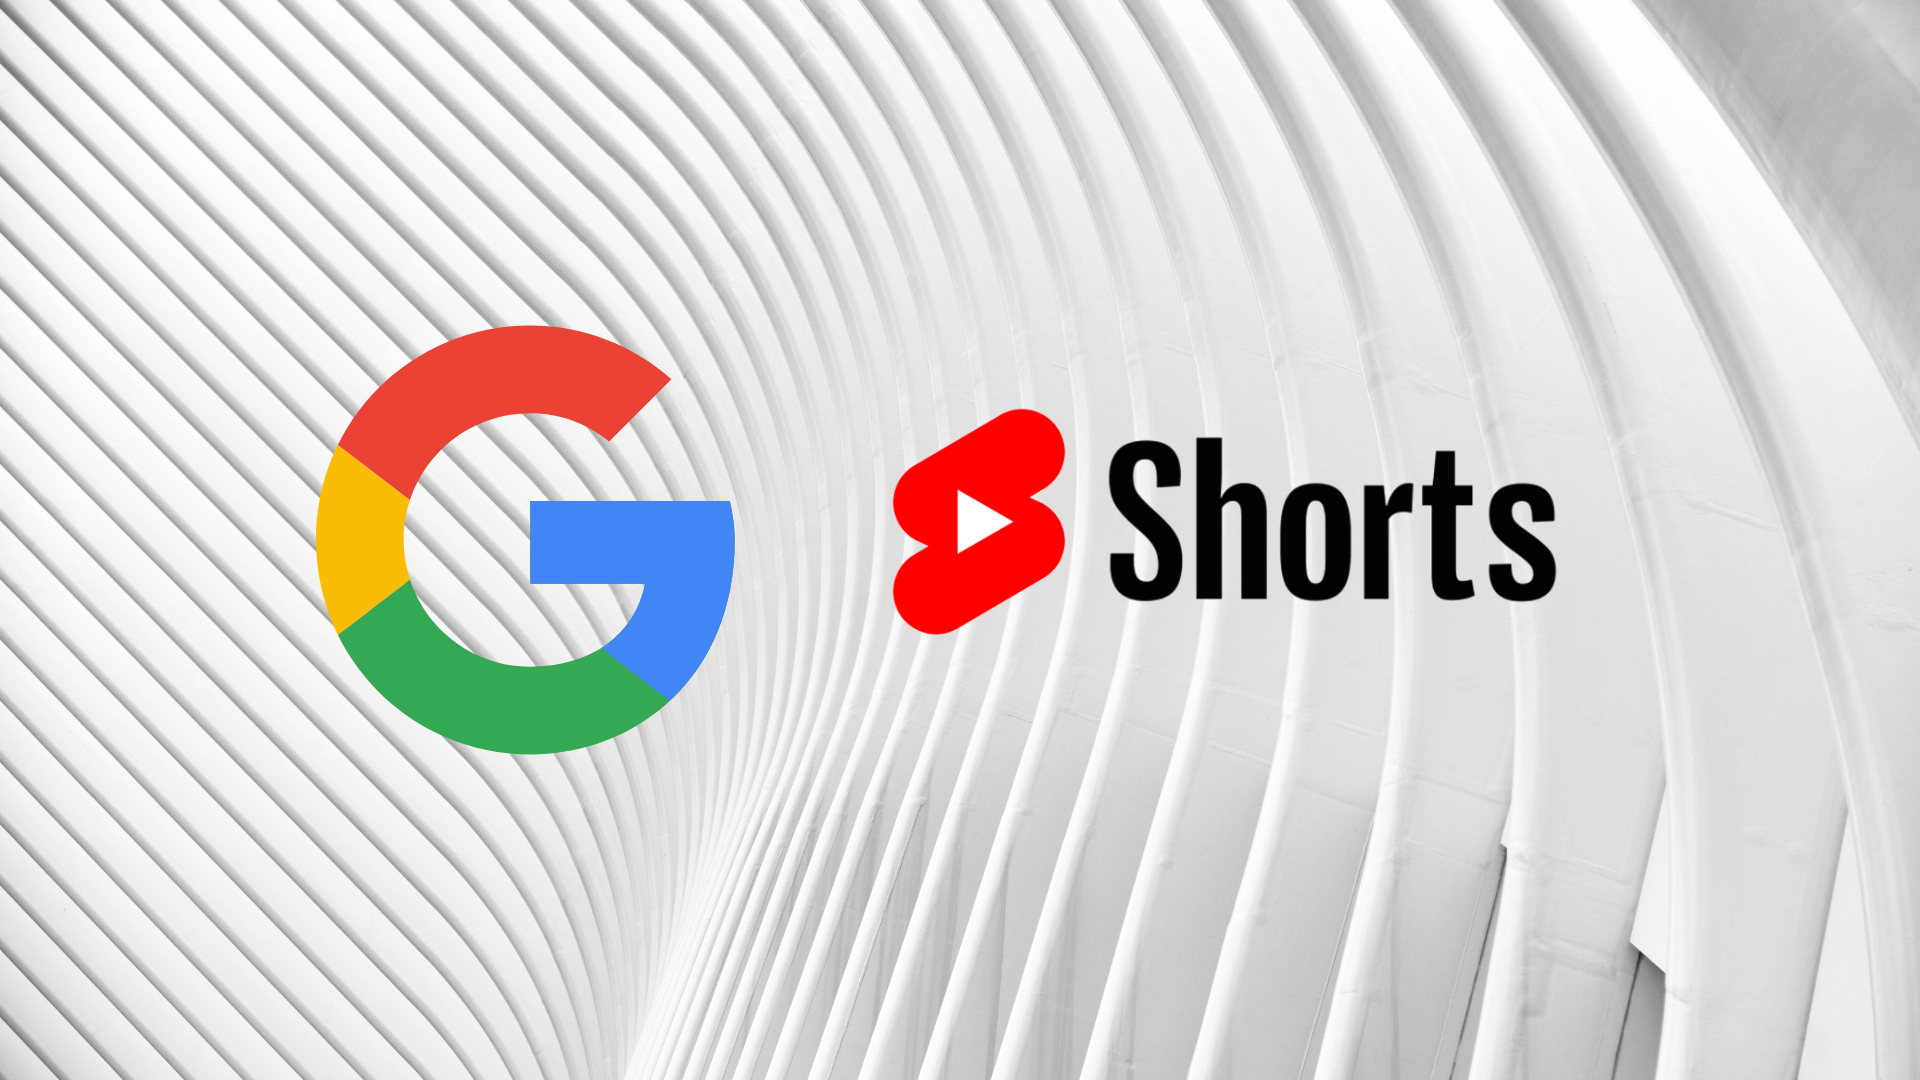 Google Begins Rolling Out YouTube Shorts Ads - PopShorts